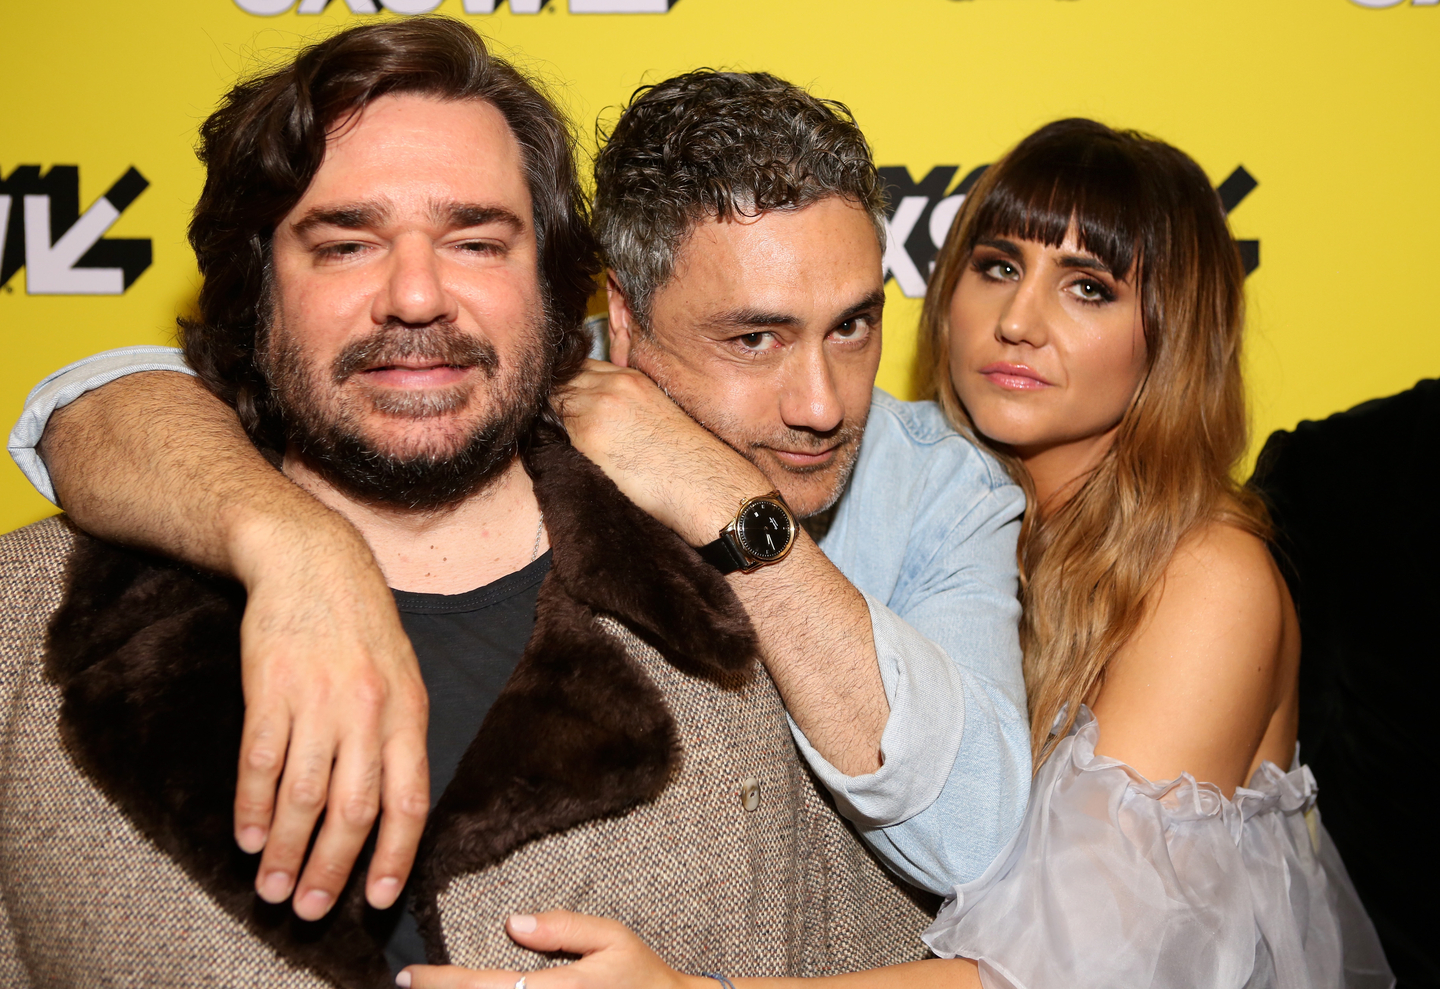 (L-R) Matt Berry, Taika Waititi, and Natasia Demetriou at the What We Do in the Shadows World Premiere – Photo by Travis P Ball/Getty Images for SXSW